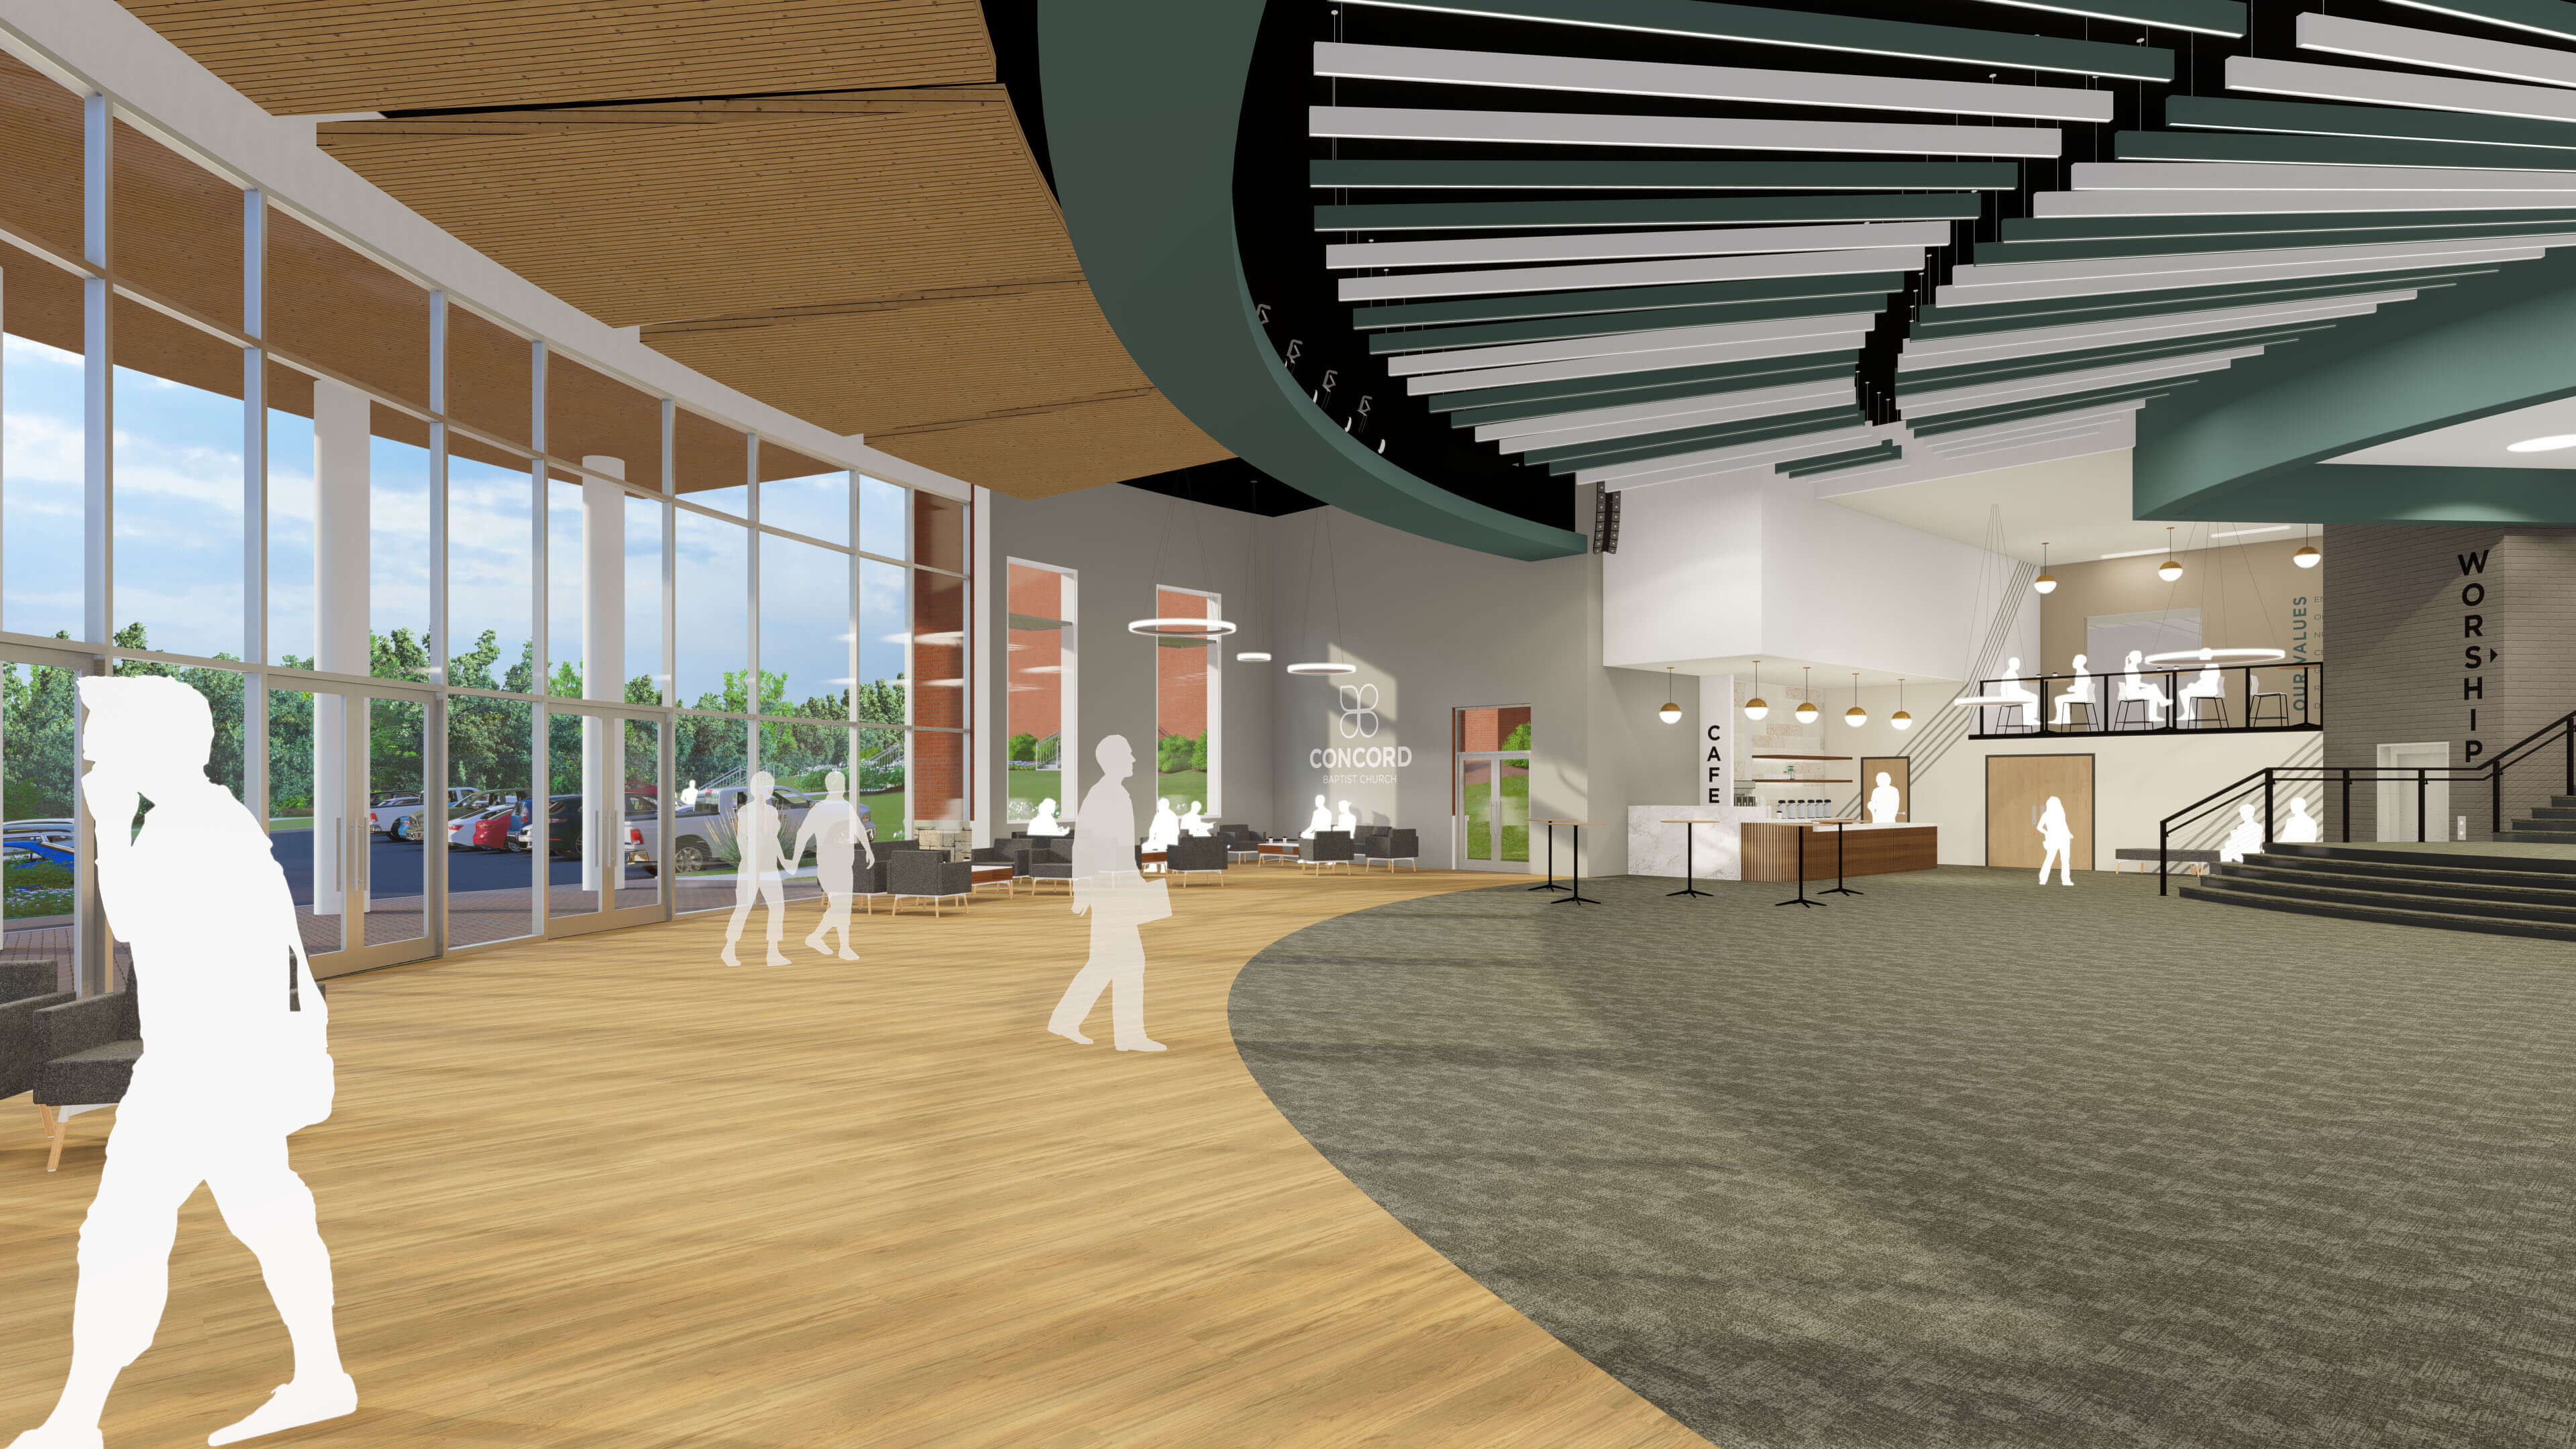 Concord Baptist Church - Primary Lobby Entry Interior Rendering